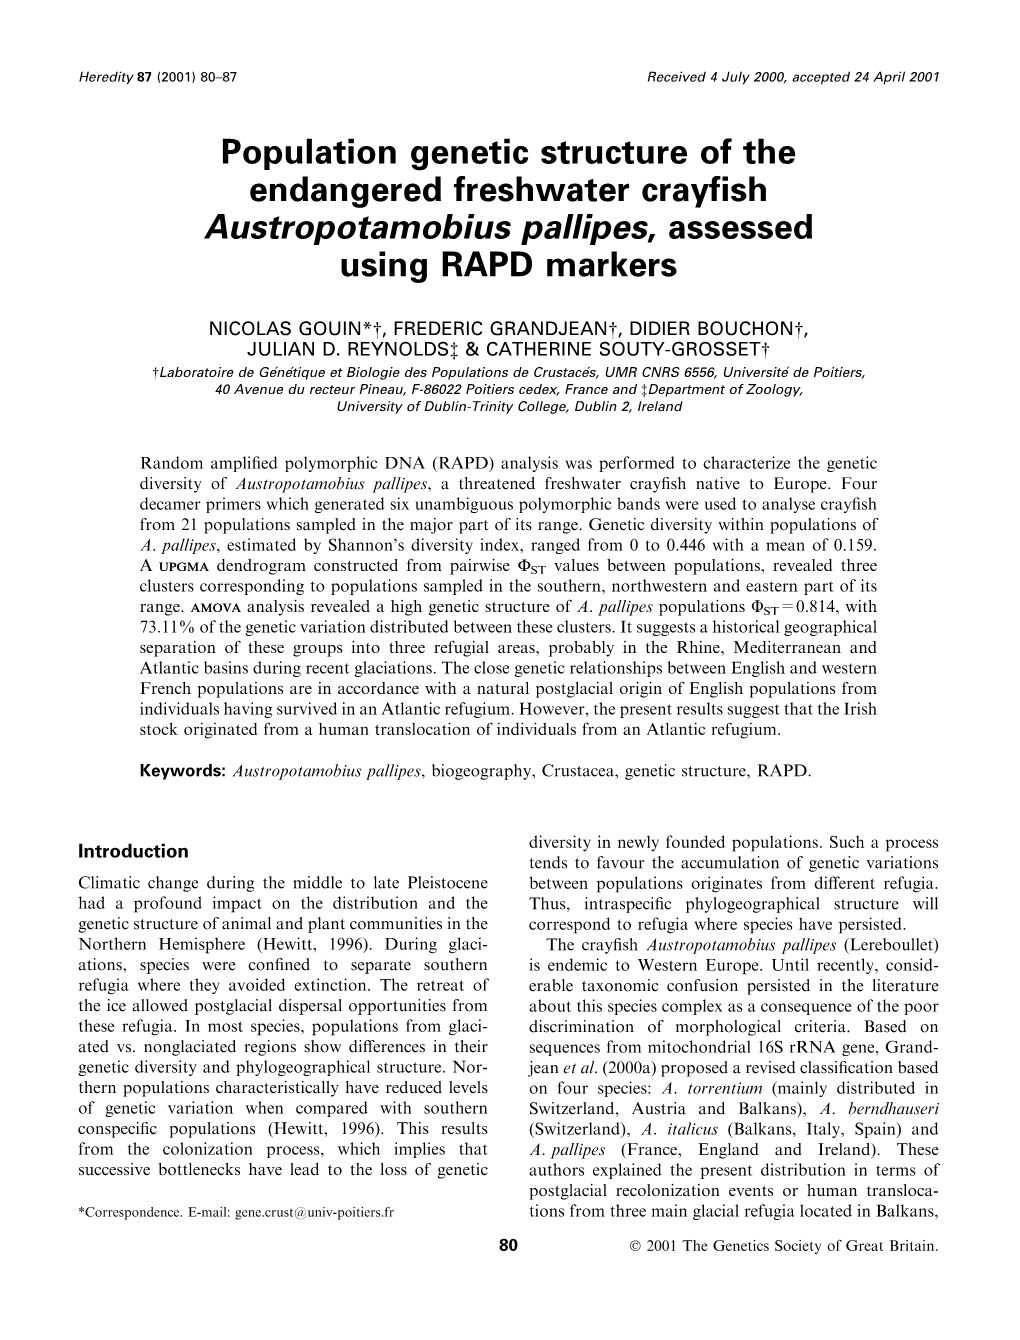 Population Genetic Structure of the Endangered Freshwater Crayfish